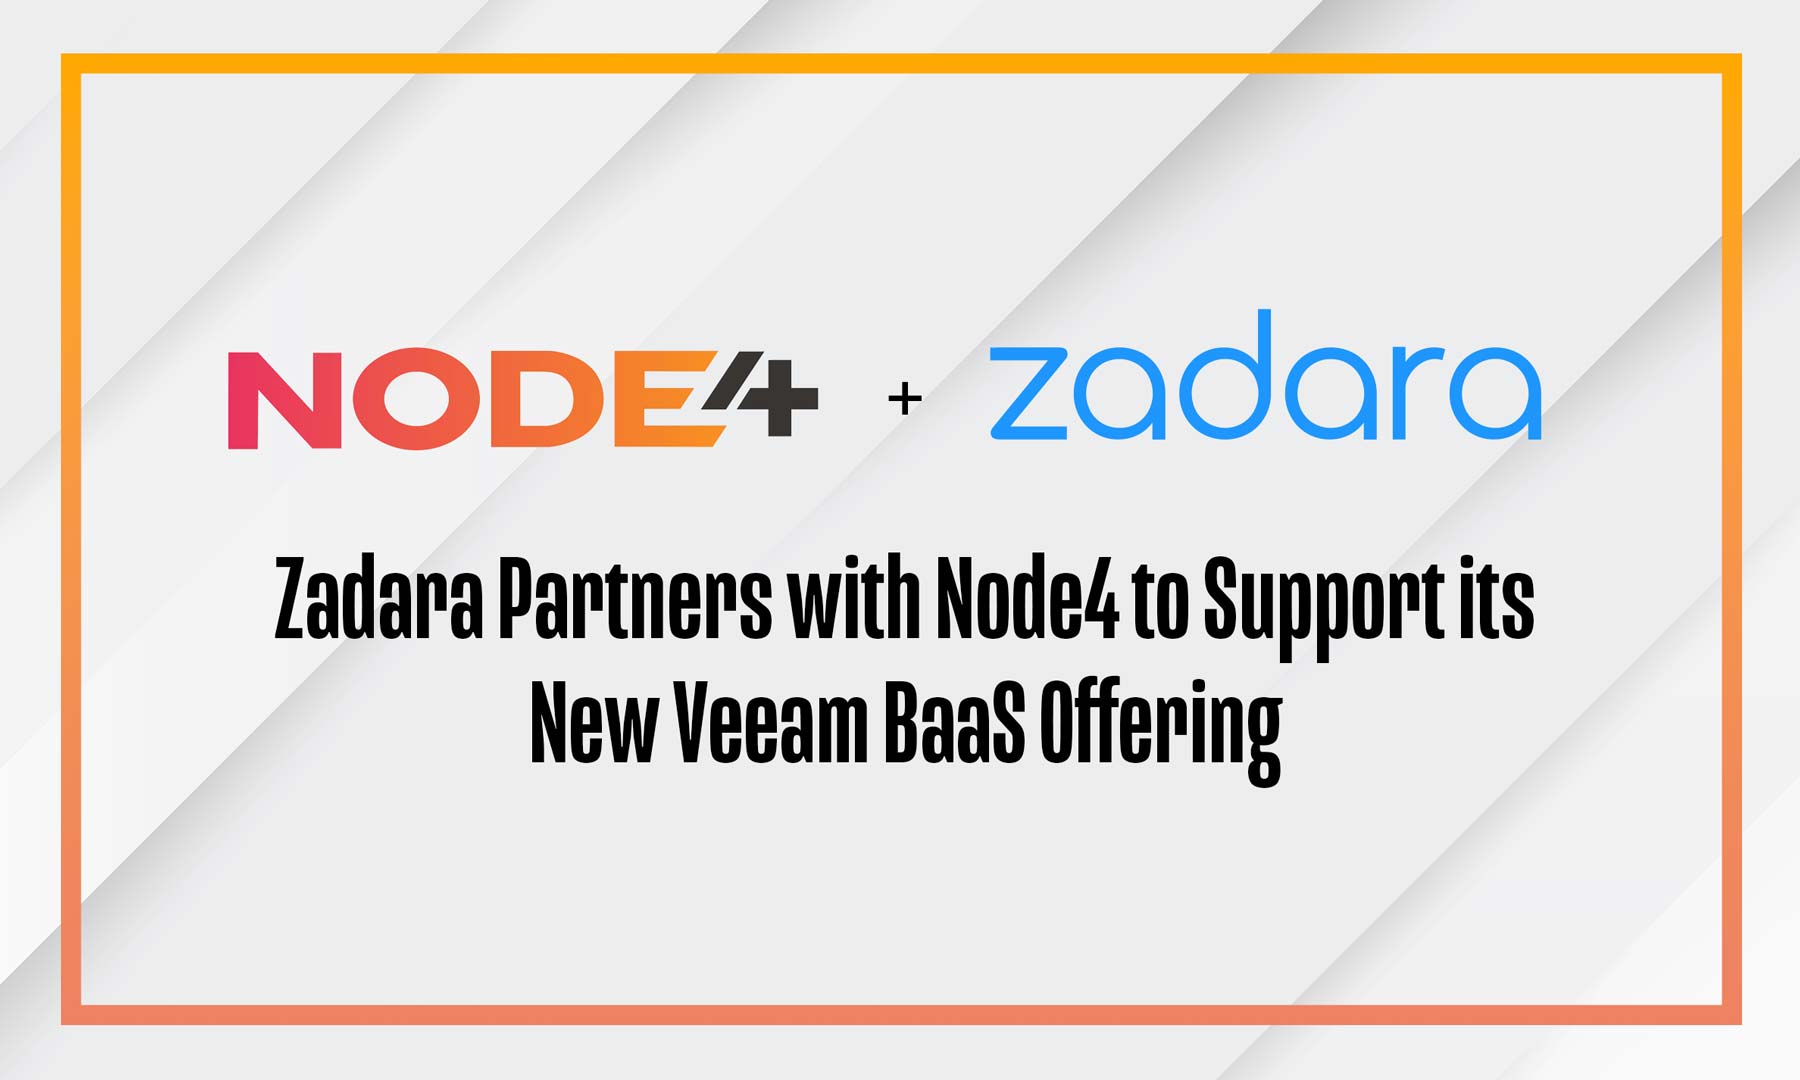 Zadara Partners with Node4 to Support its New Veeam BaaS Offering